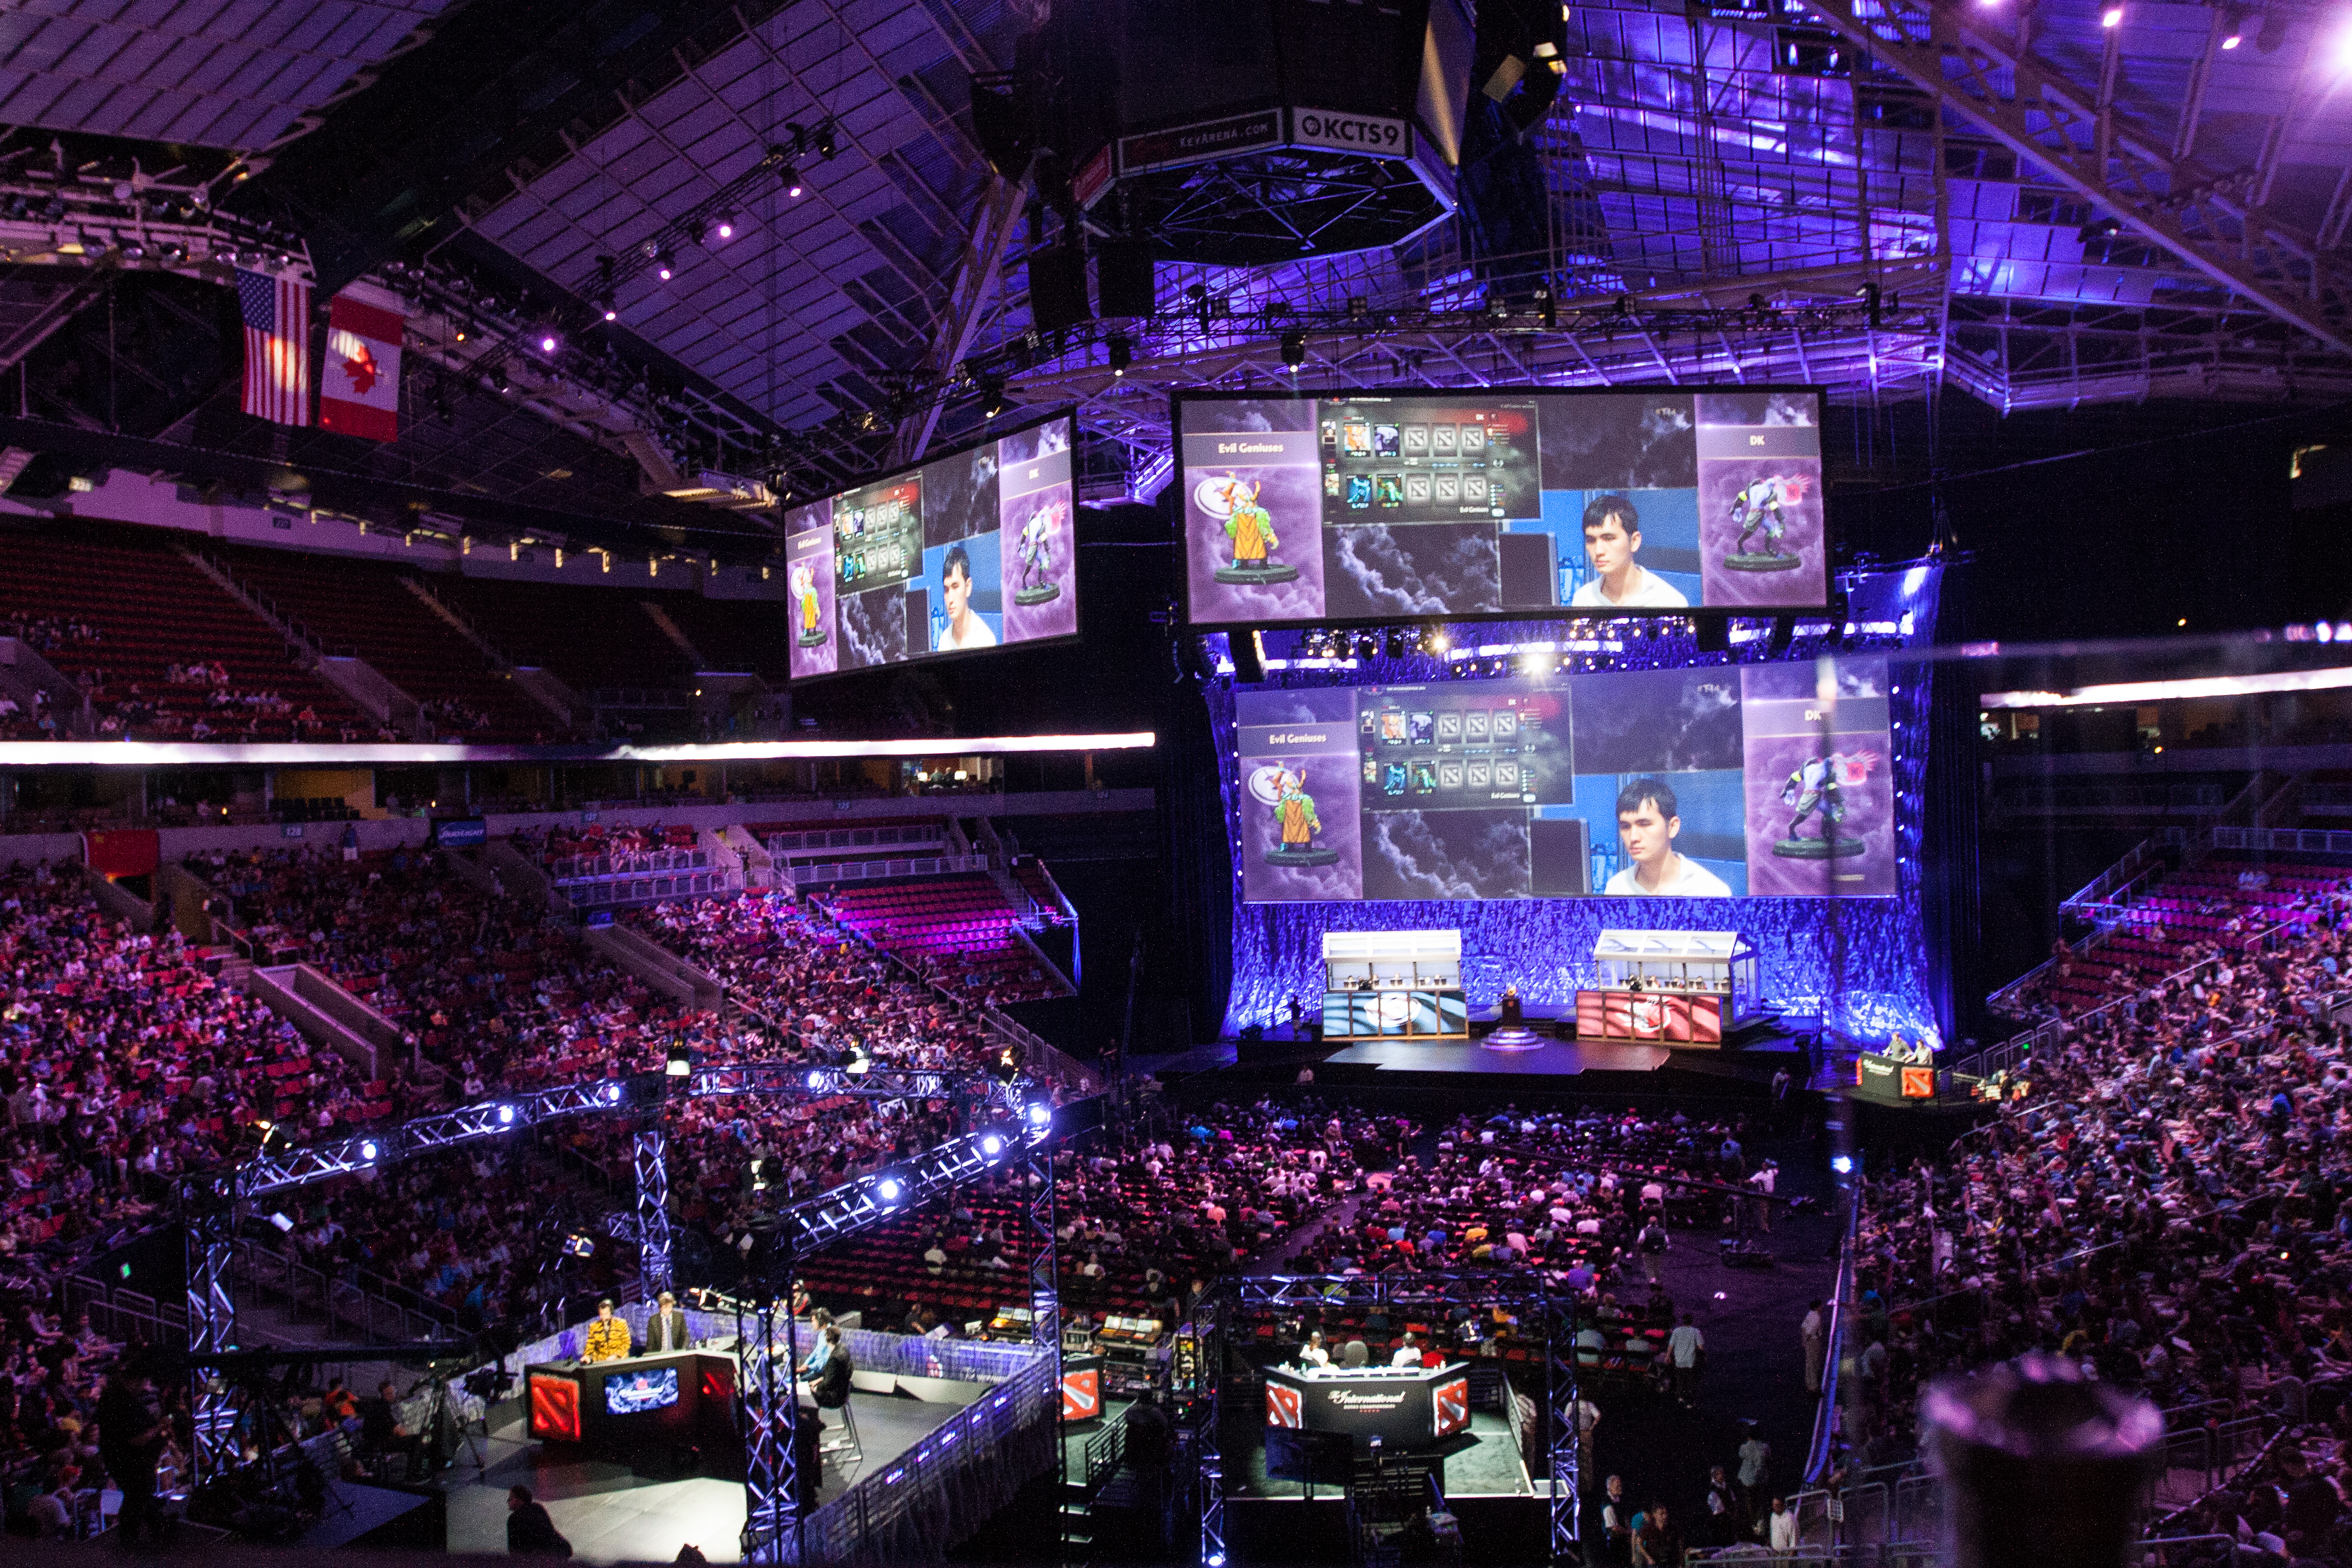 PHOTO: Stadium filled with people watching esports tournament. With over 5 million in prize money going to the winners of the International 4 event last July, five gamers became instant millionaires. This event was hosted at the Staples Center in LA. Image by Jakob Well and courtesy of the Creative Commons.